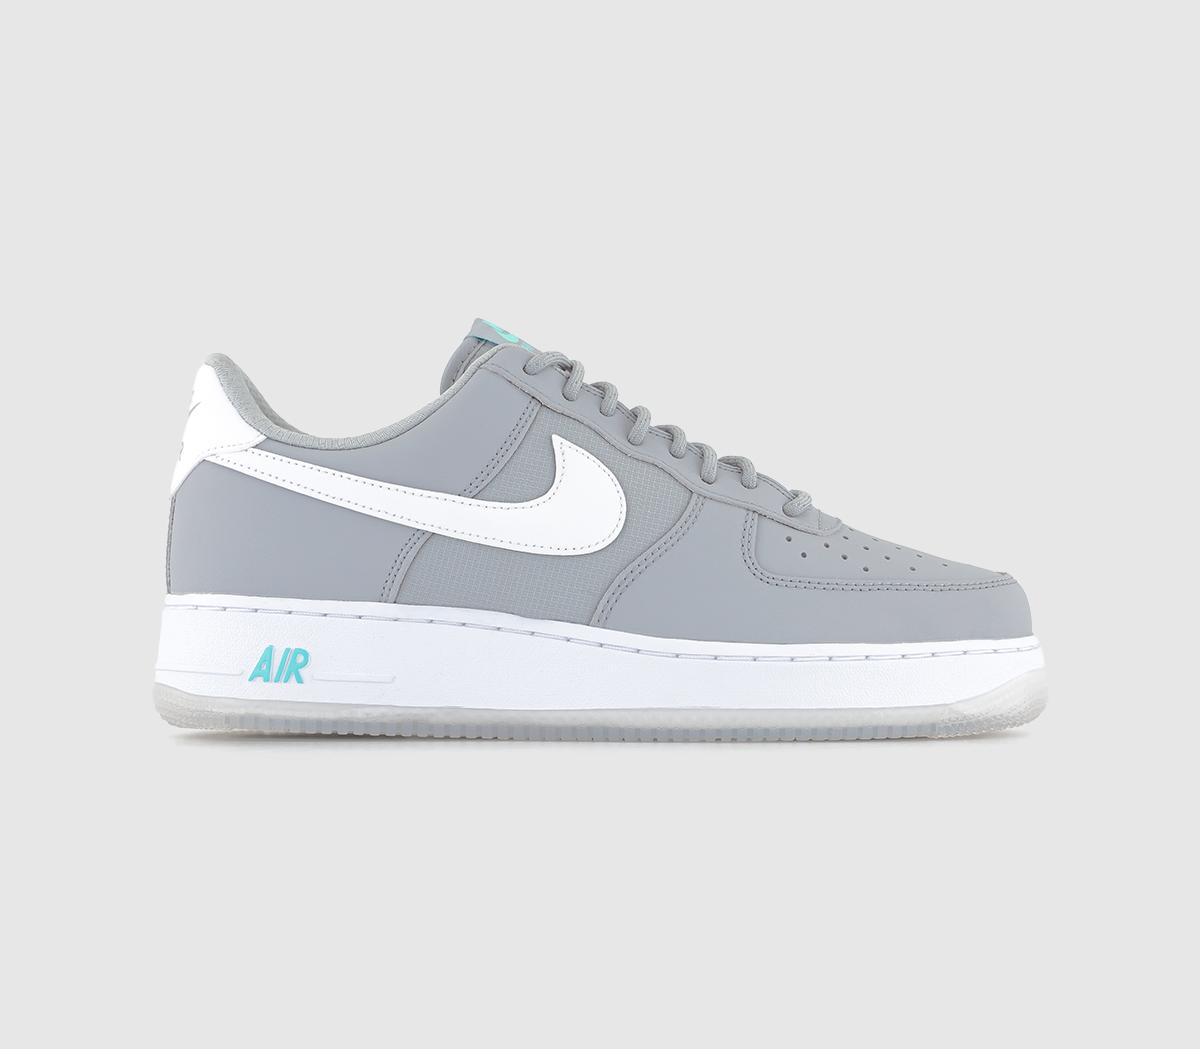 NikeAir Force 1 '07 TrainersWolf Grey White Hyper Turquoise